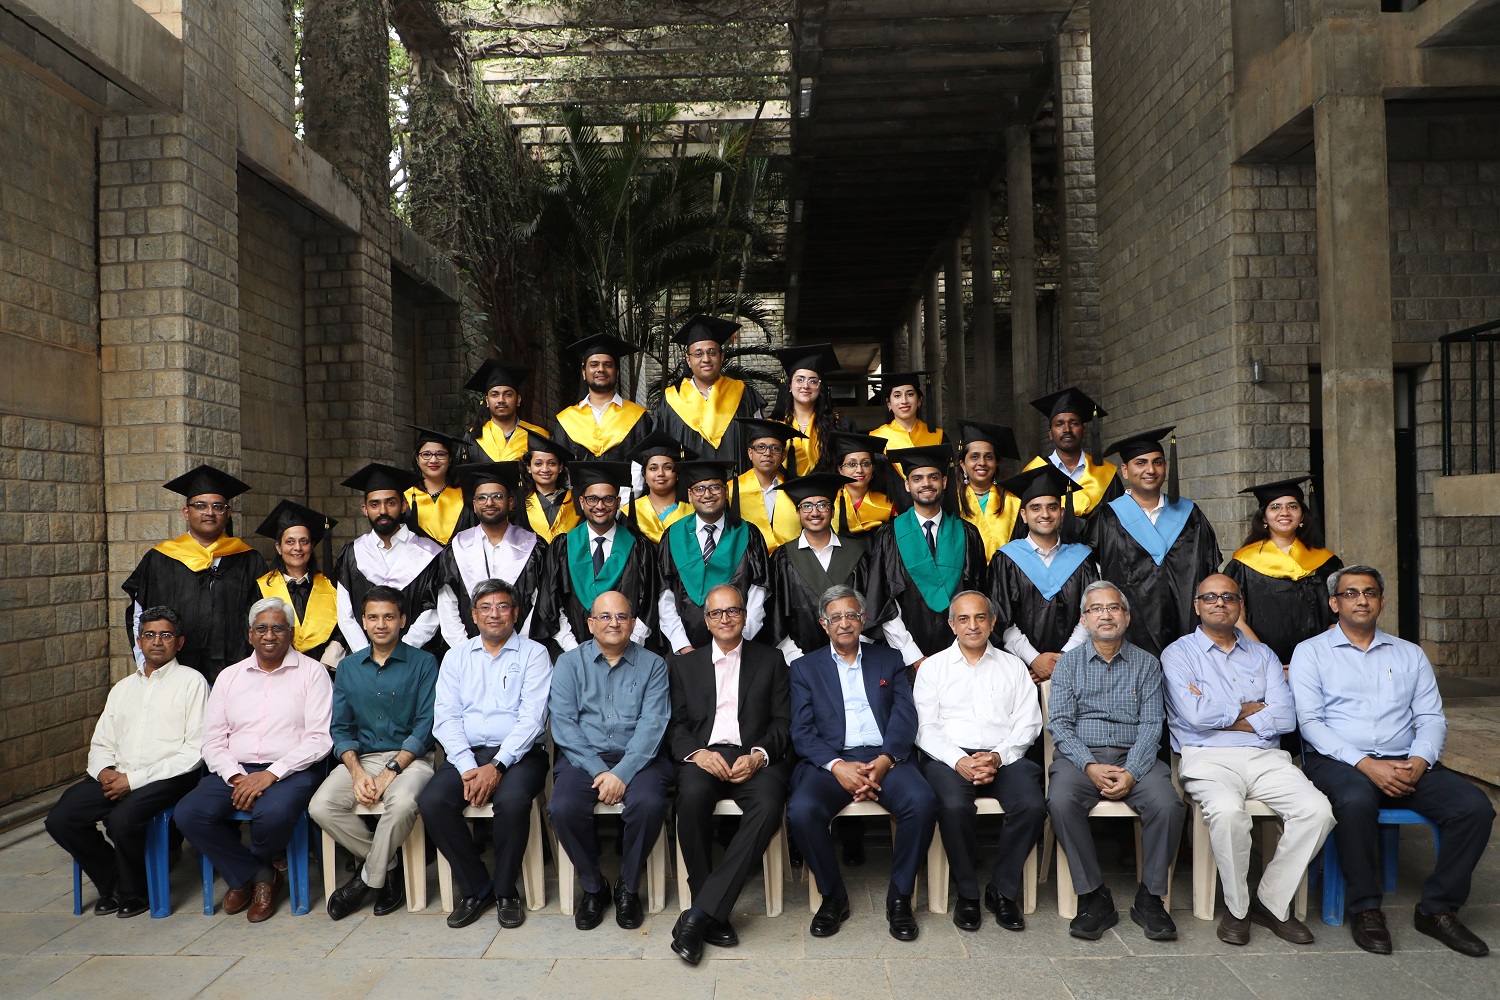 The Chairperson of the Board of Governors of IIMB, Director, IIMB, Deans, and Chairpersons of the degree-granting programmes  along with graduating PhD scholars and gold medal winners from all the programmes.